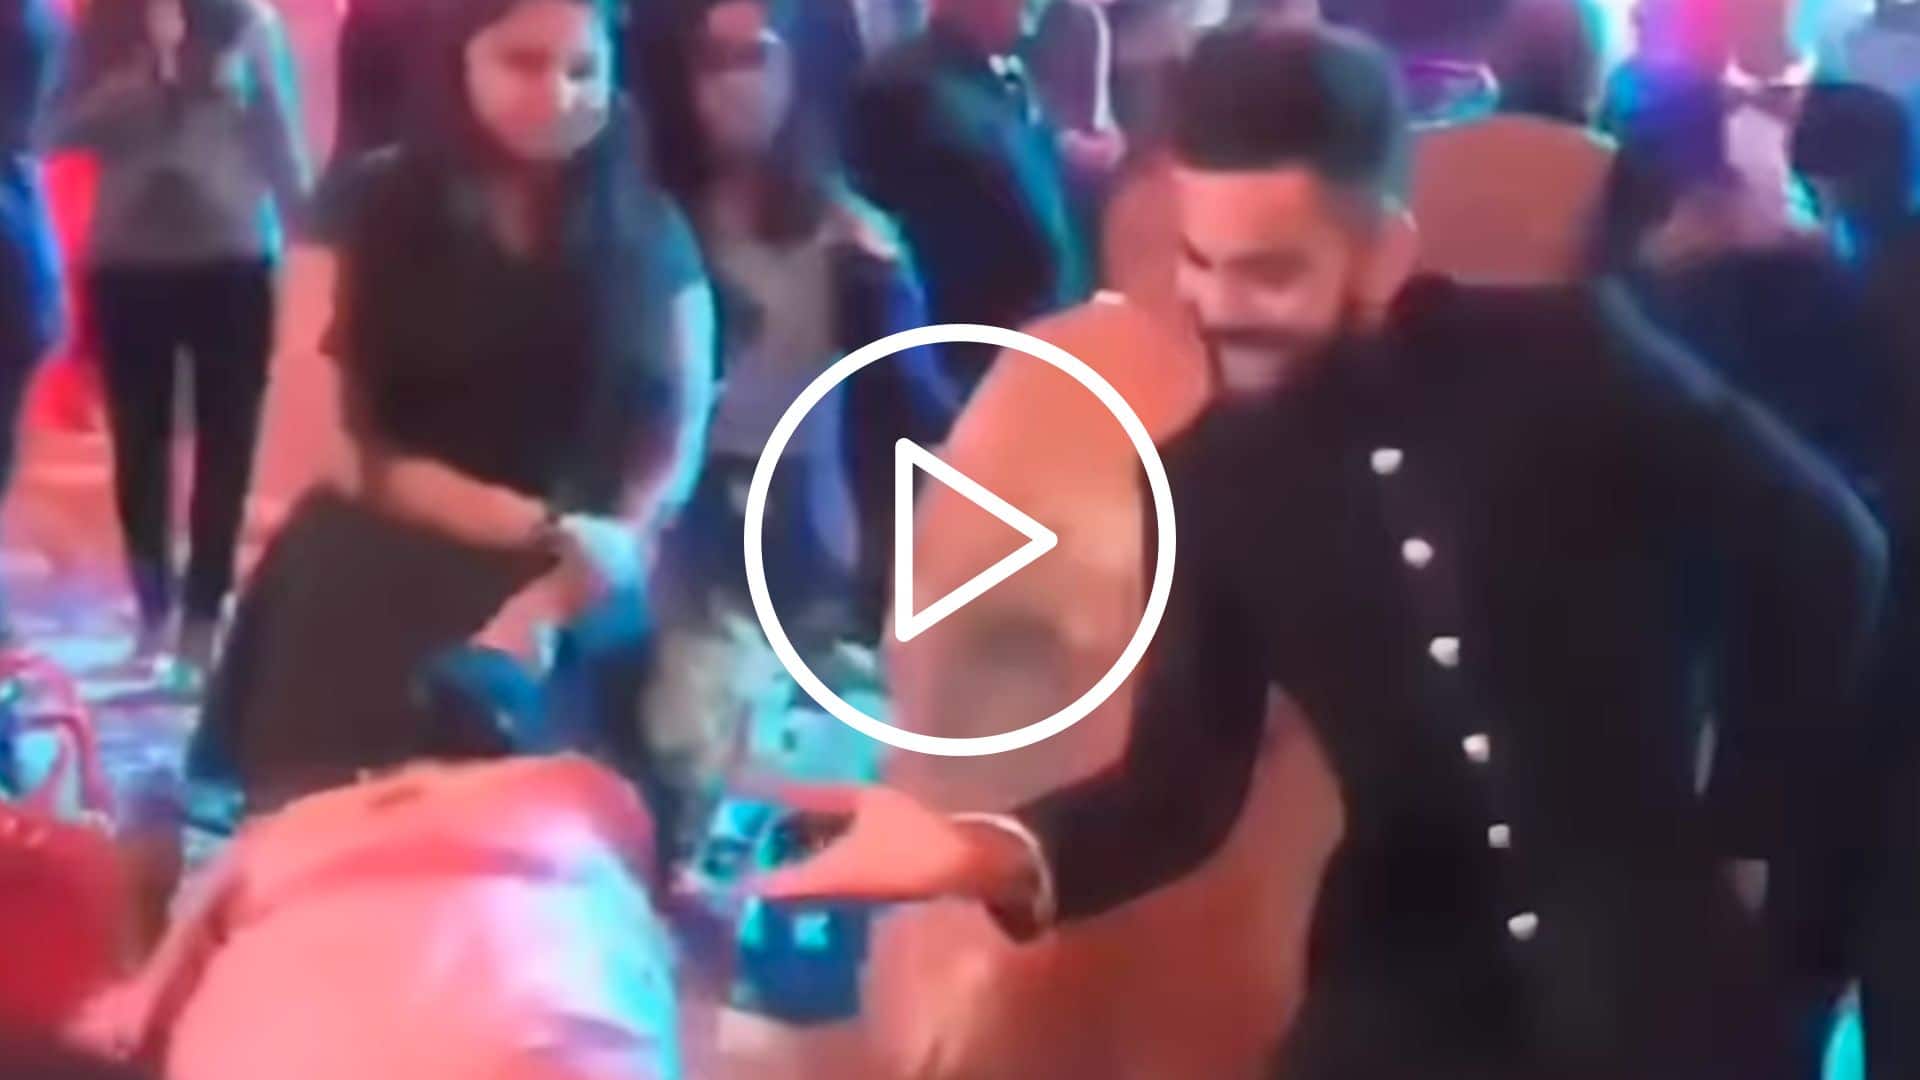 [Watch] Virat Kohli's Adorable Bhangra For His Mother During His Wedding Reception